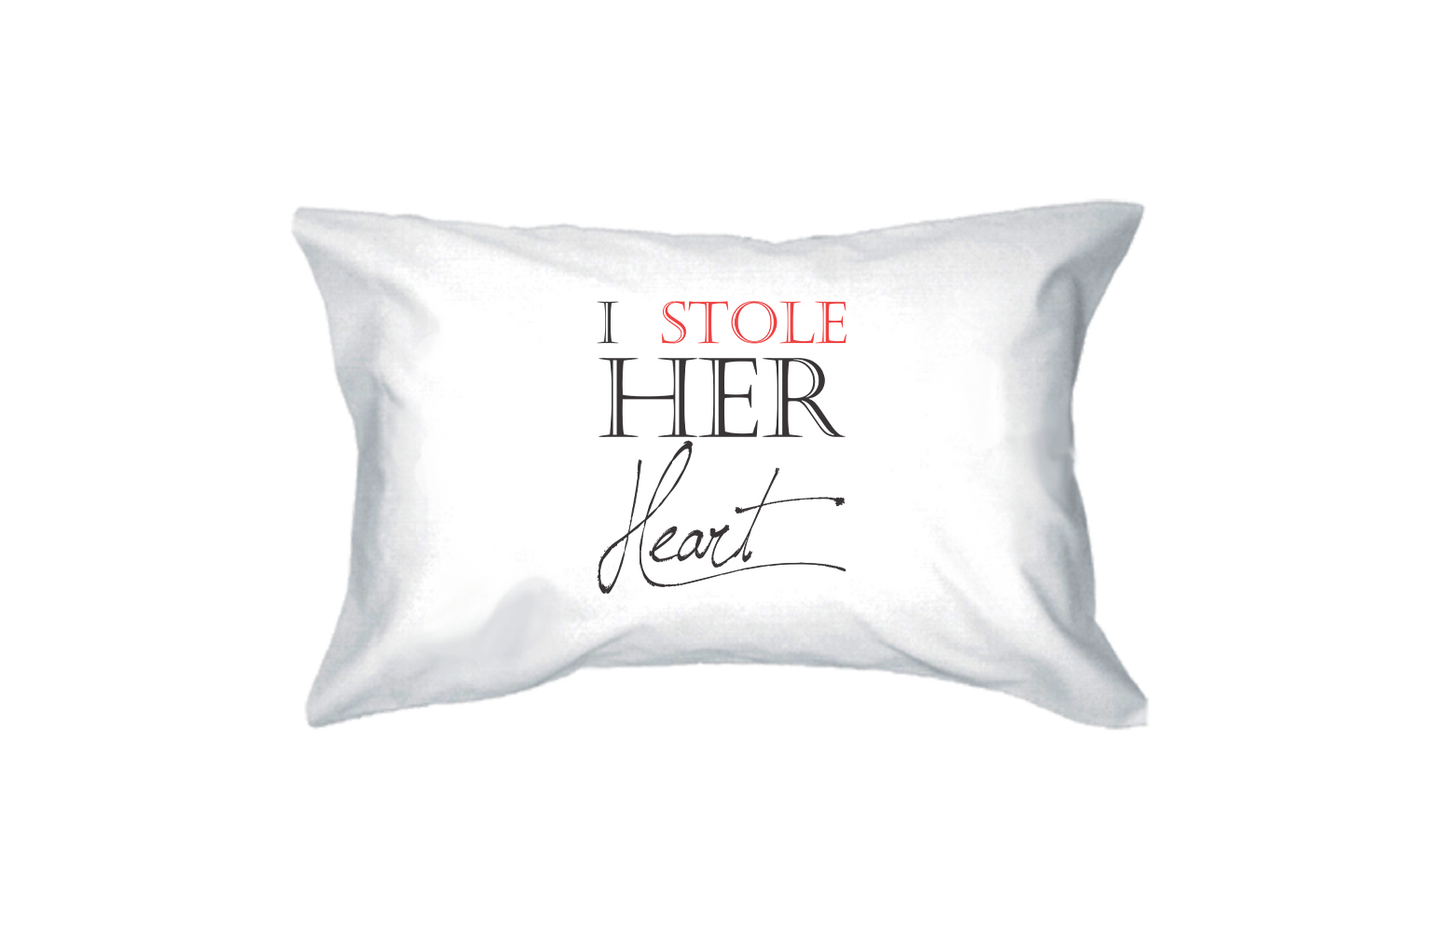 I stole her heart pillow case